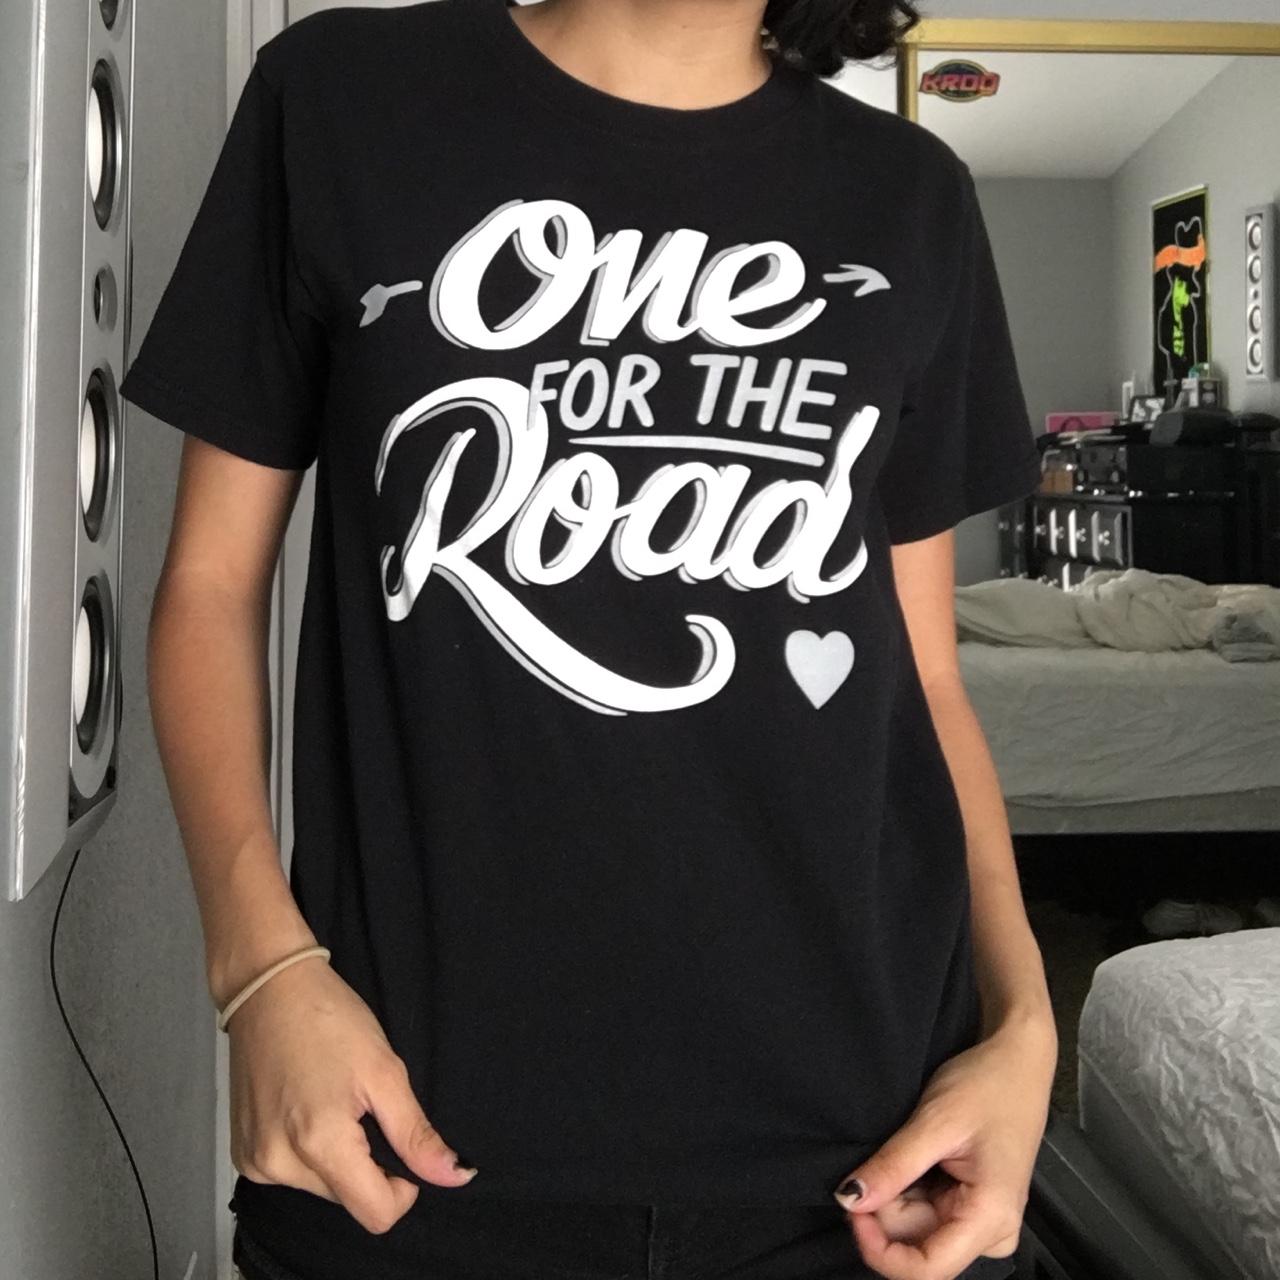 Arctic Monkeys 'One for the road' shirt! This design - Depop